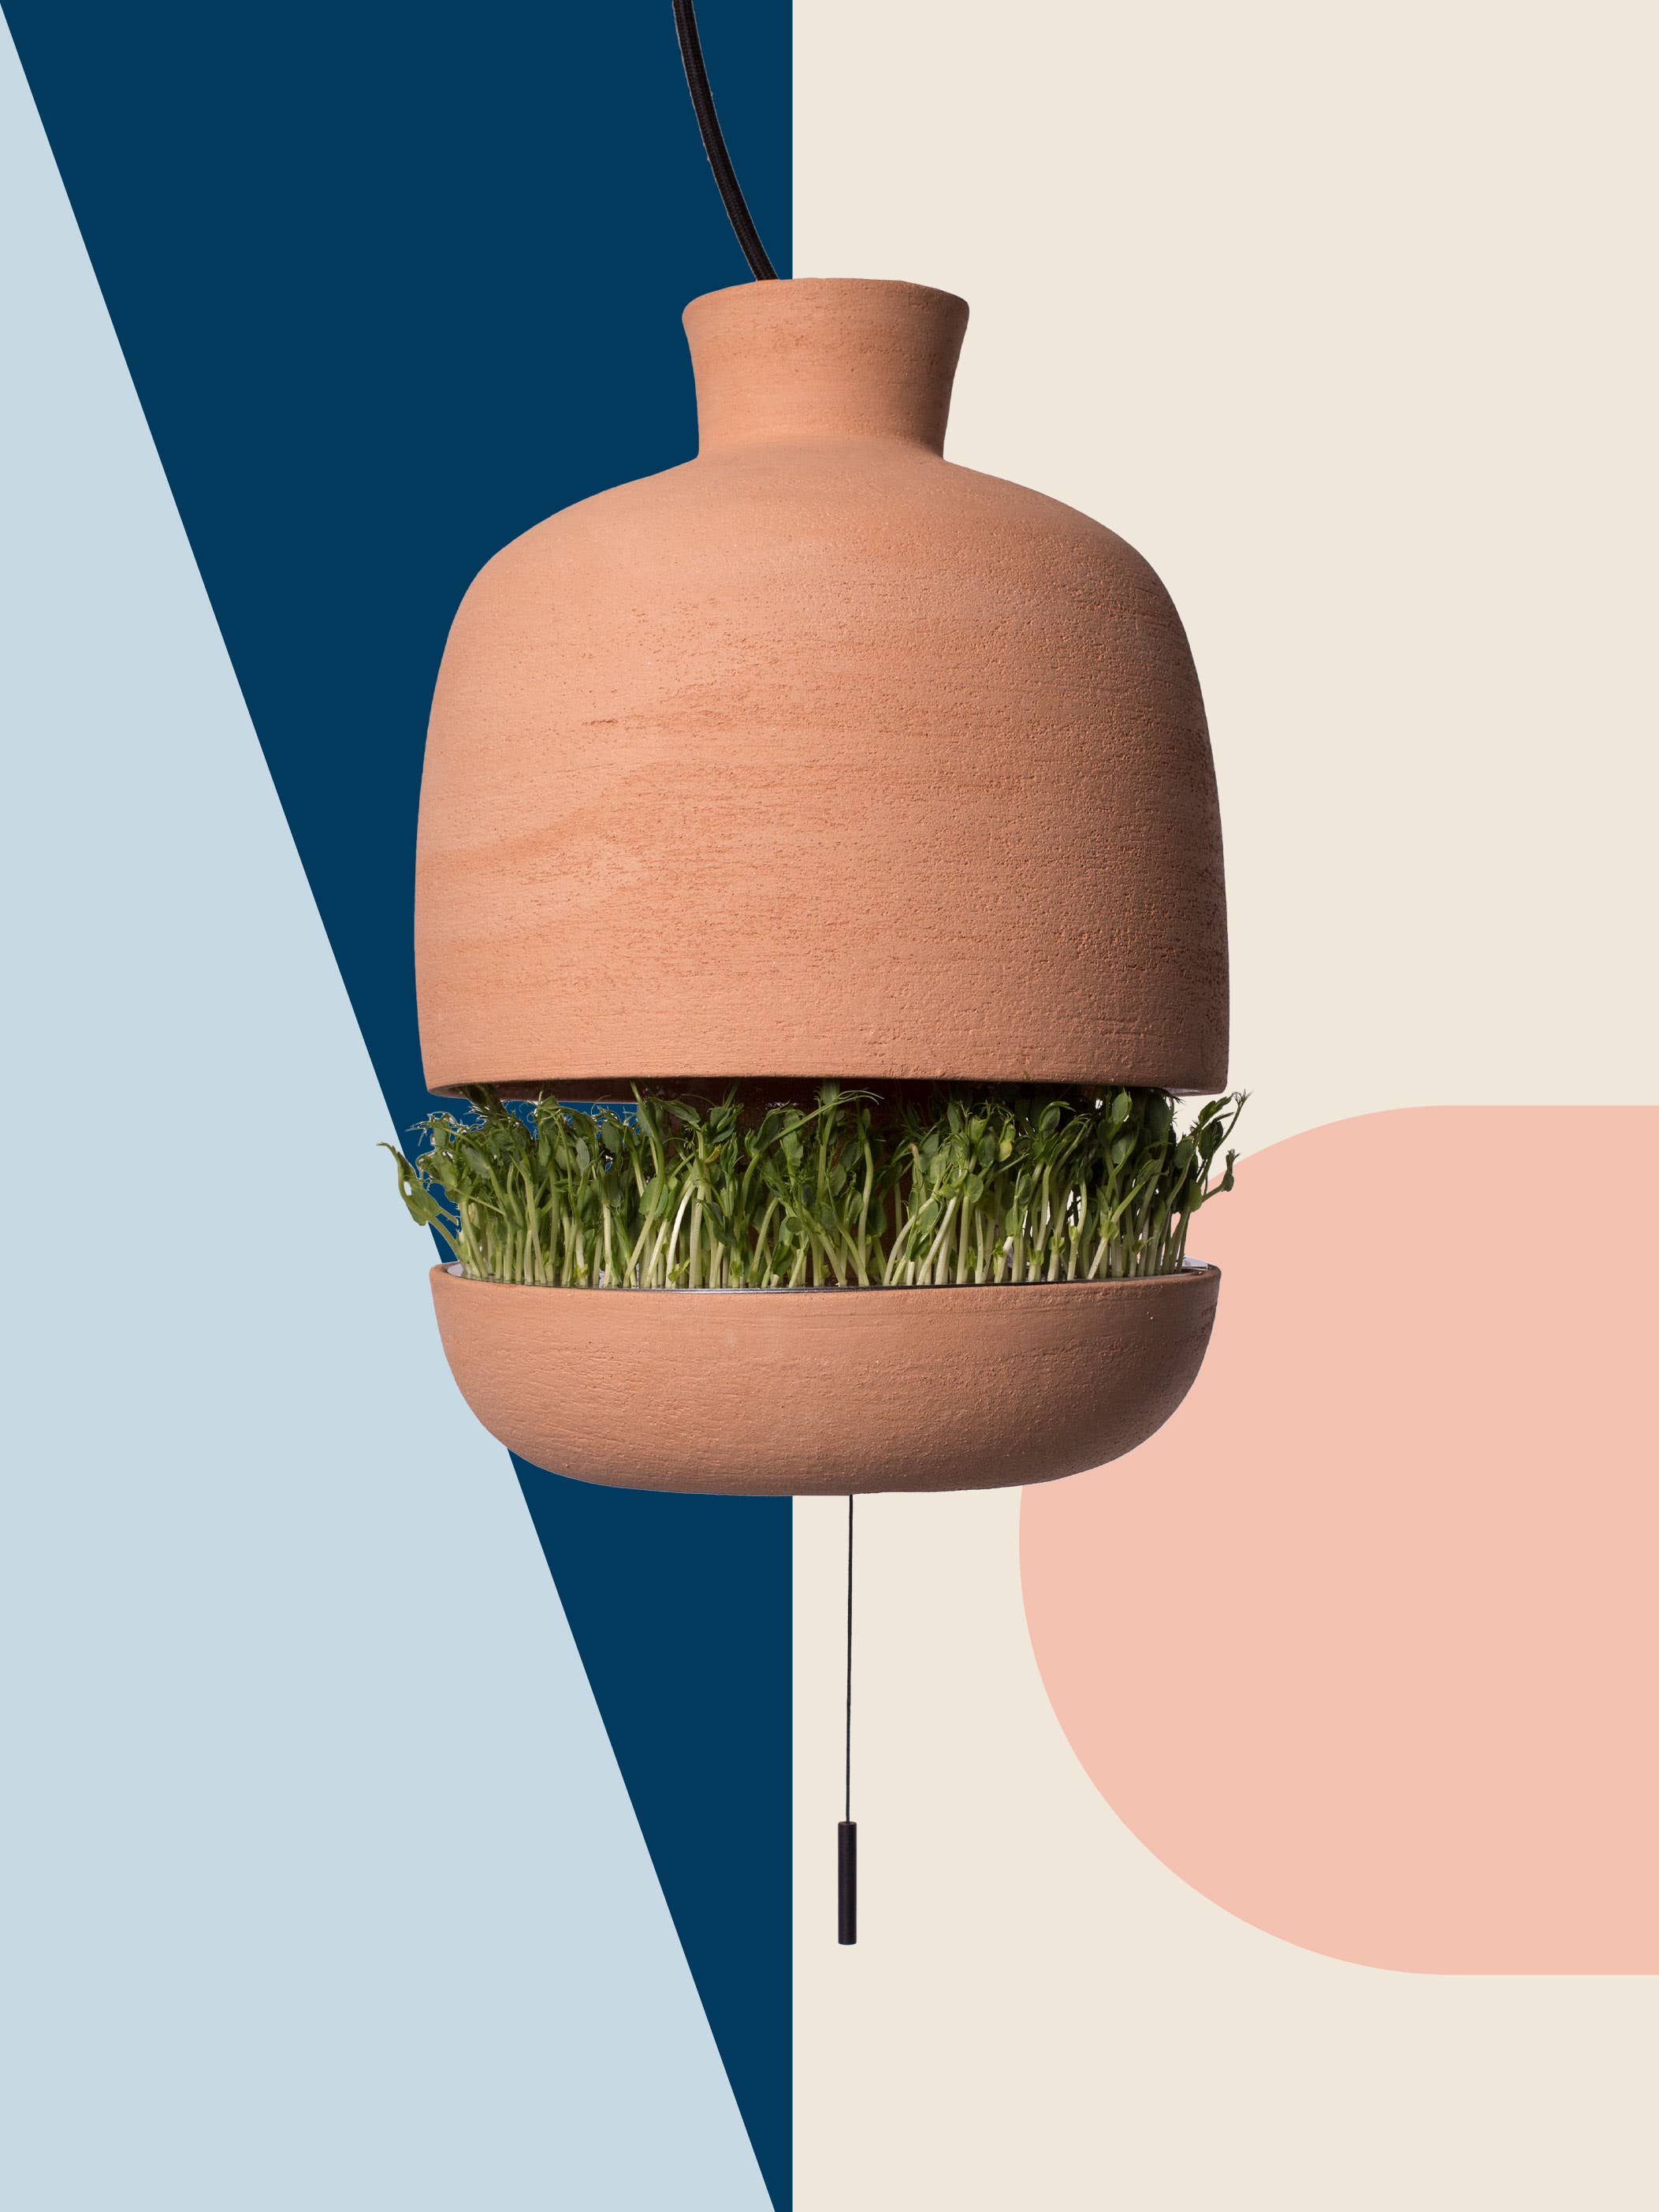 This Cool Terra-Cotta Lamp Doubles as a Vegetable Garden